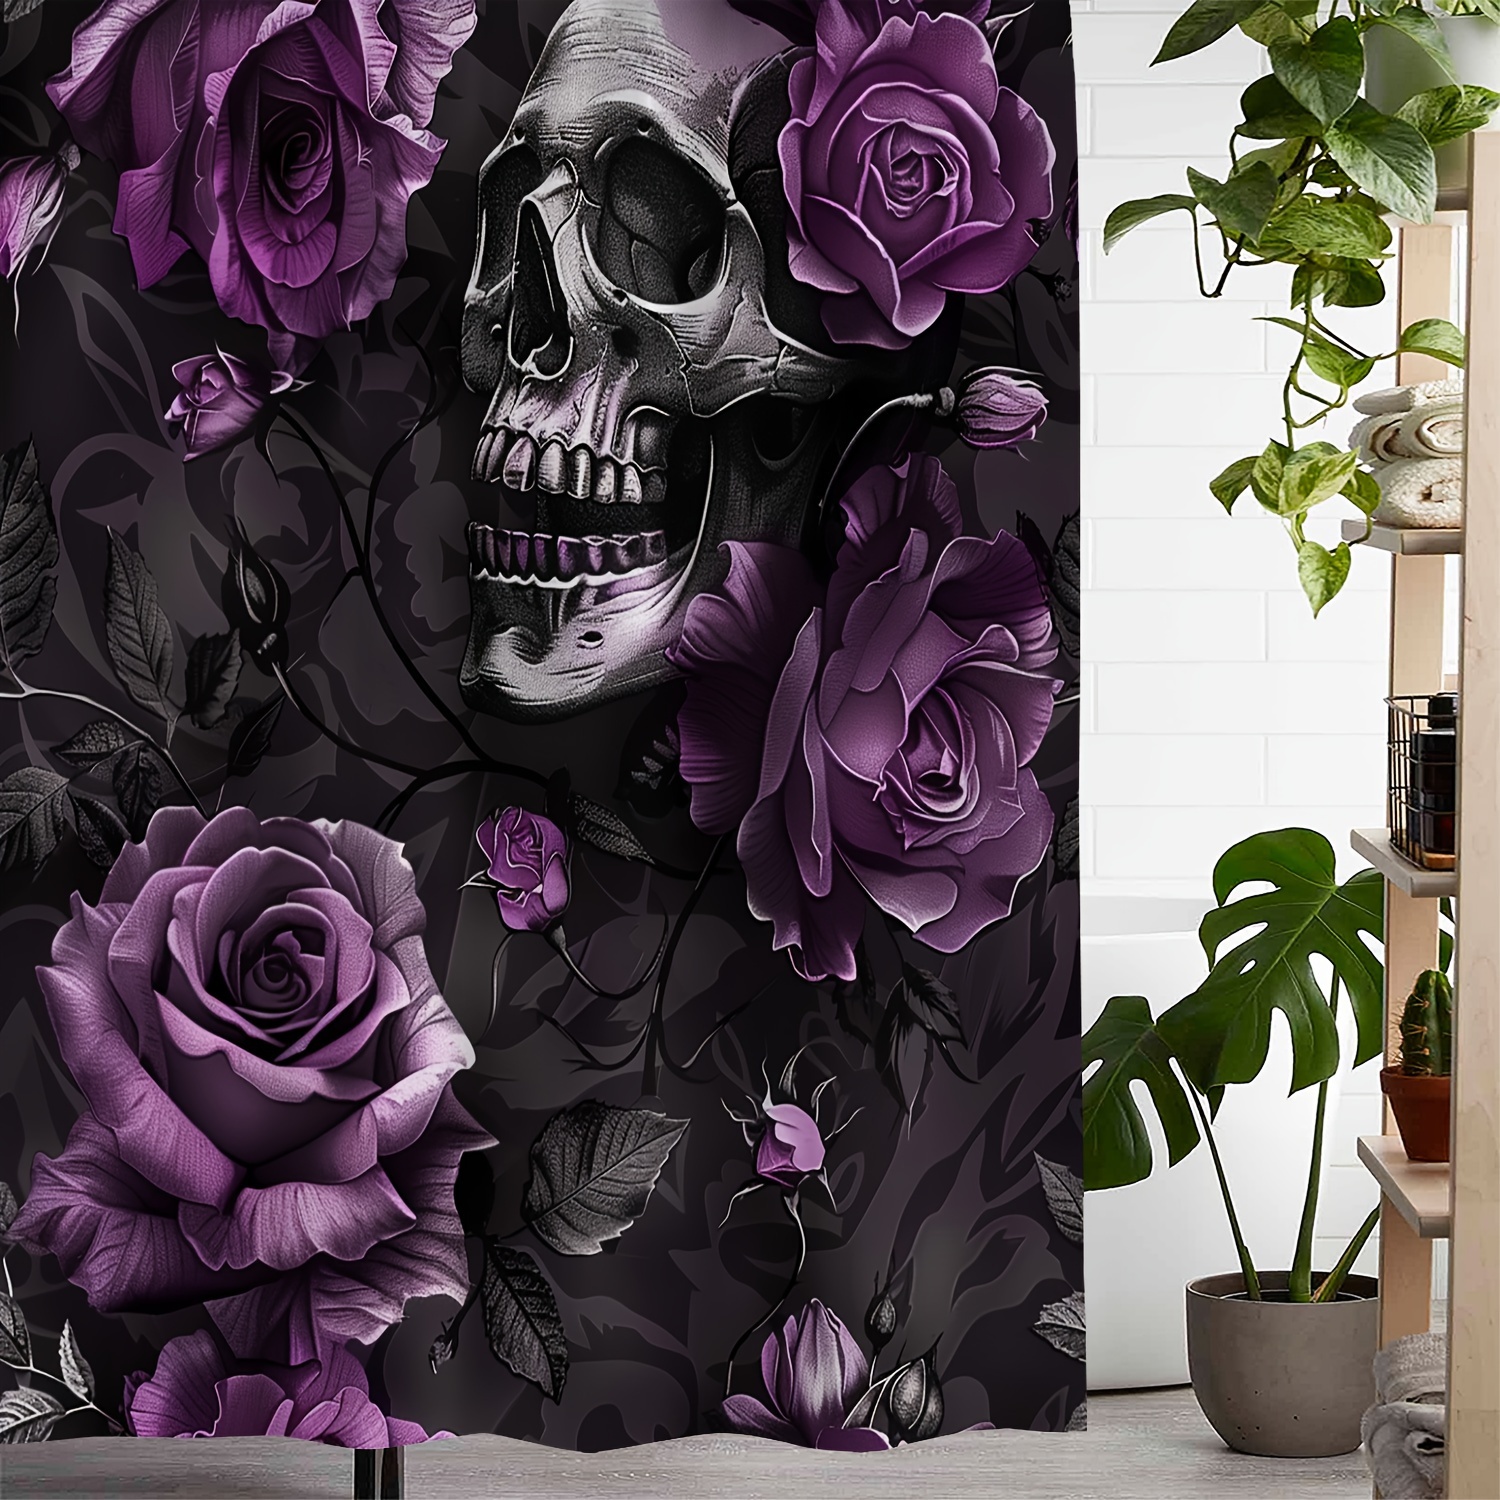 

Ultimate Waterproof Halloween Bath Curtain: 72"x72" (183cmx183cm) - Artistic Purple Floral Design, Machine Washable, Includes 12 Hooks, Suitable For Windows And Showers